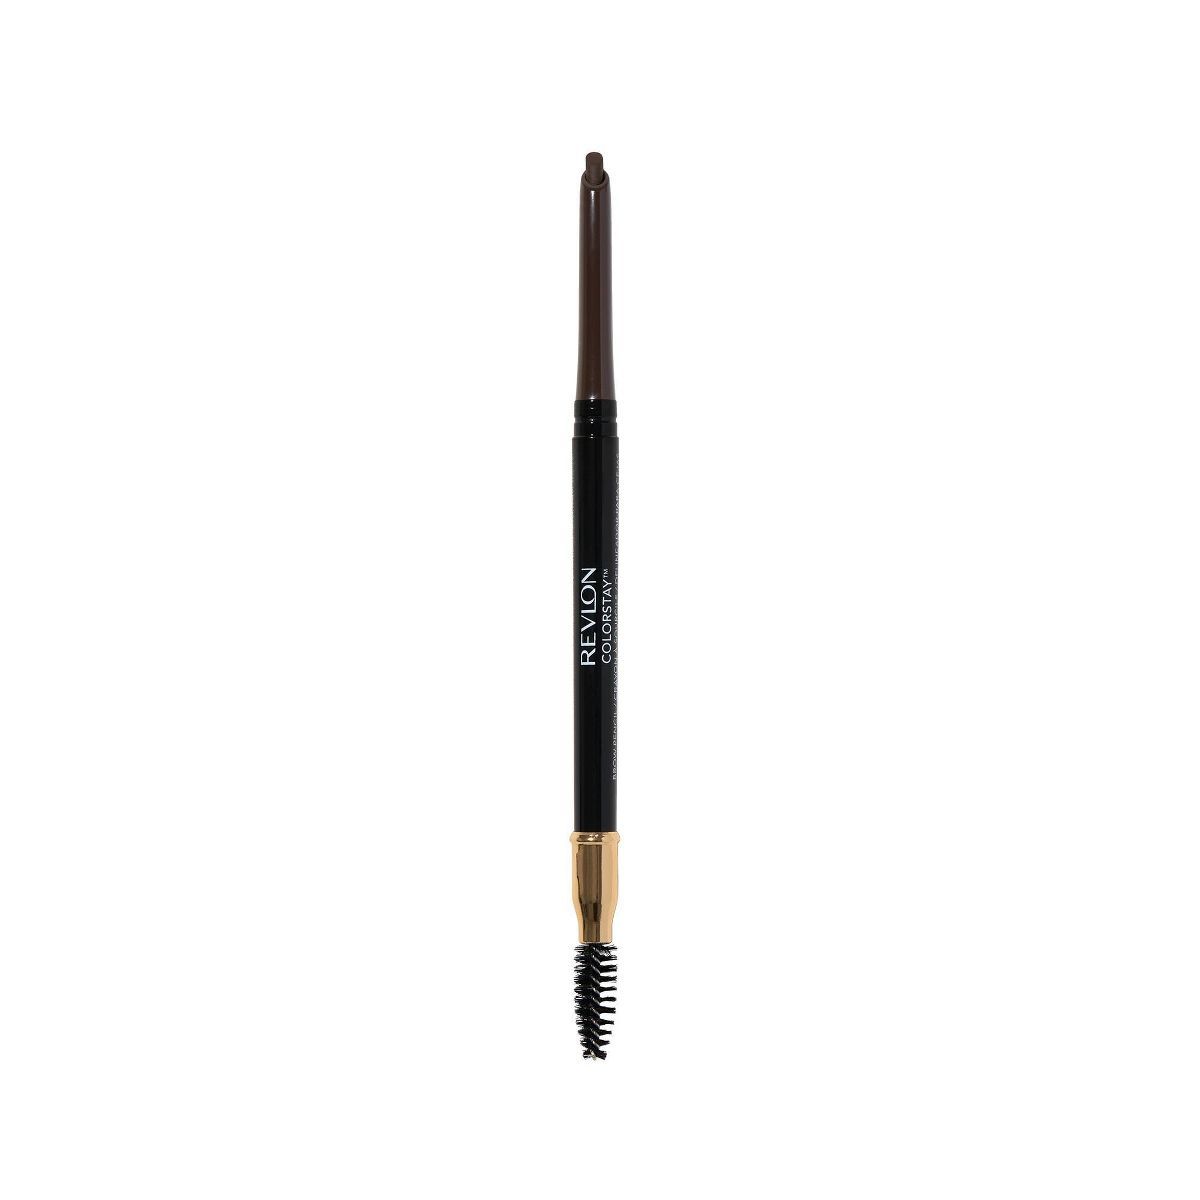 Revlon Colorstay Brow Pencil - Waterproof with Angled Tip | Target